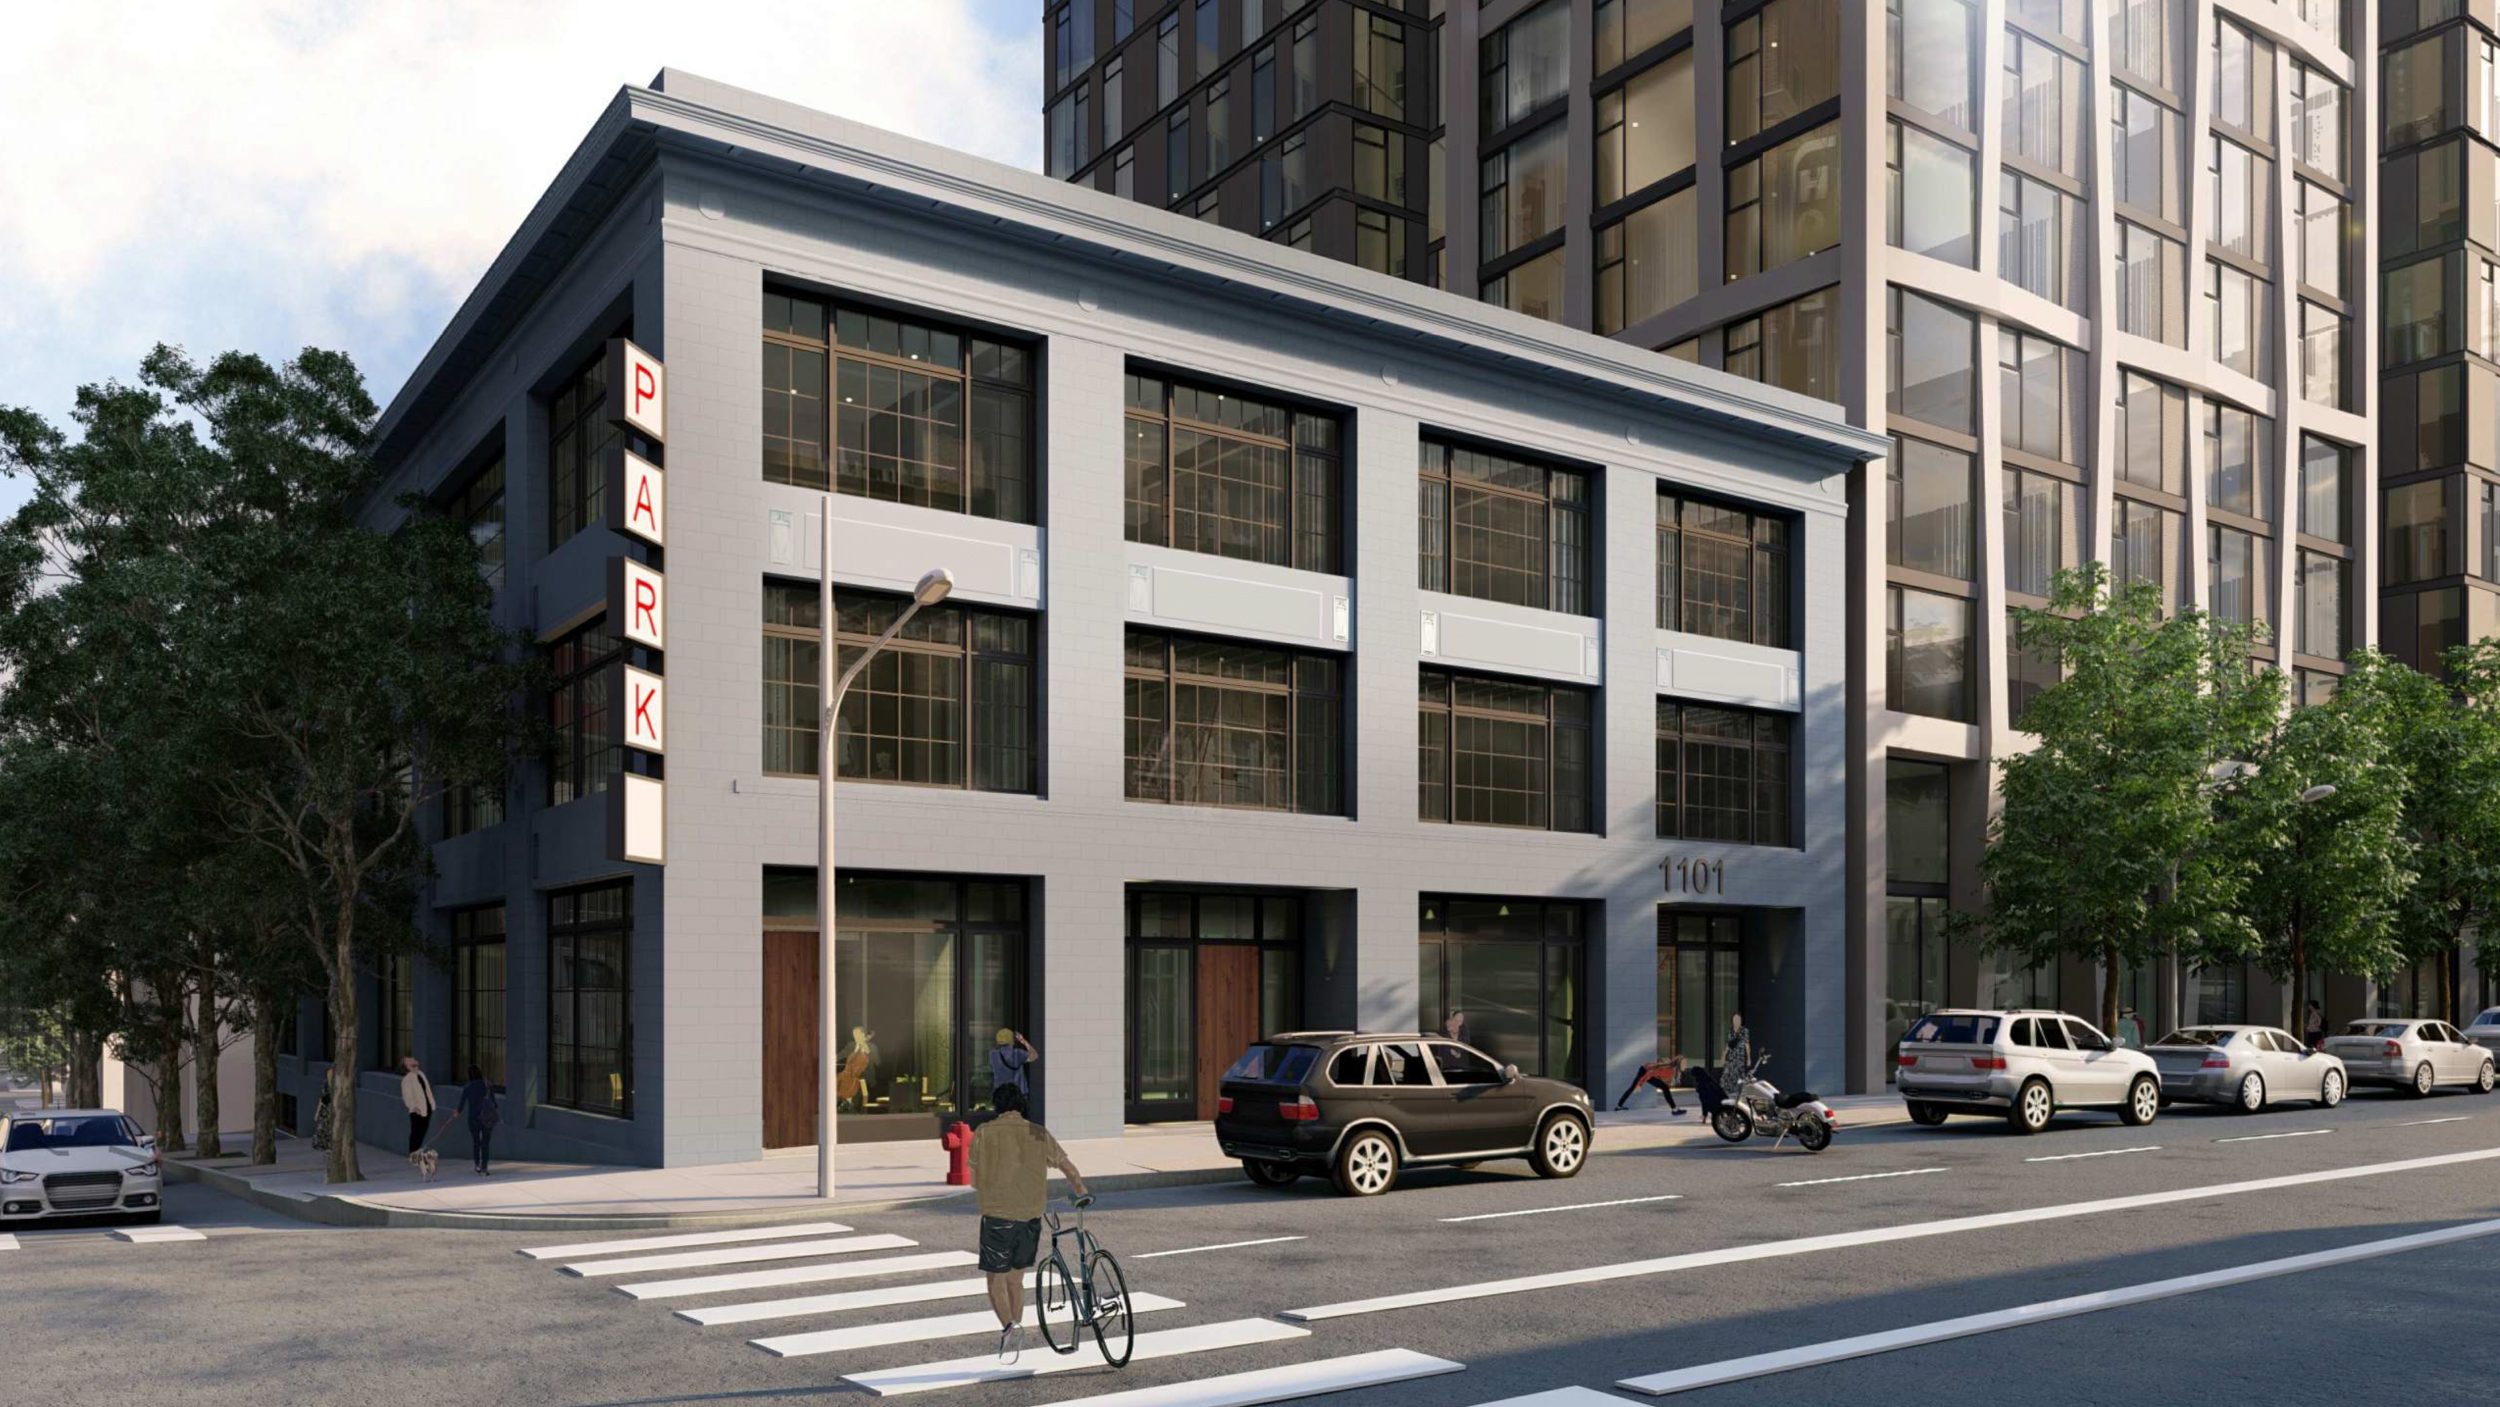 1101 Sutter Street renovated historic structure, rendering by David Baker Architects